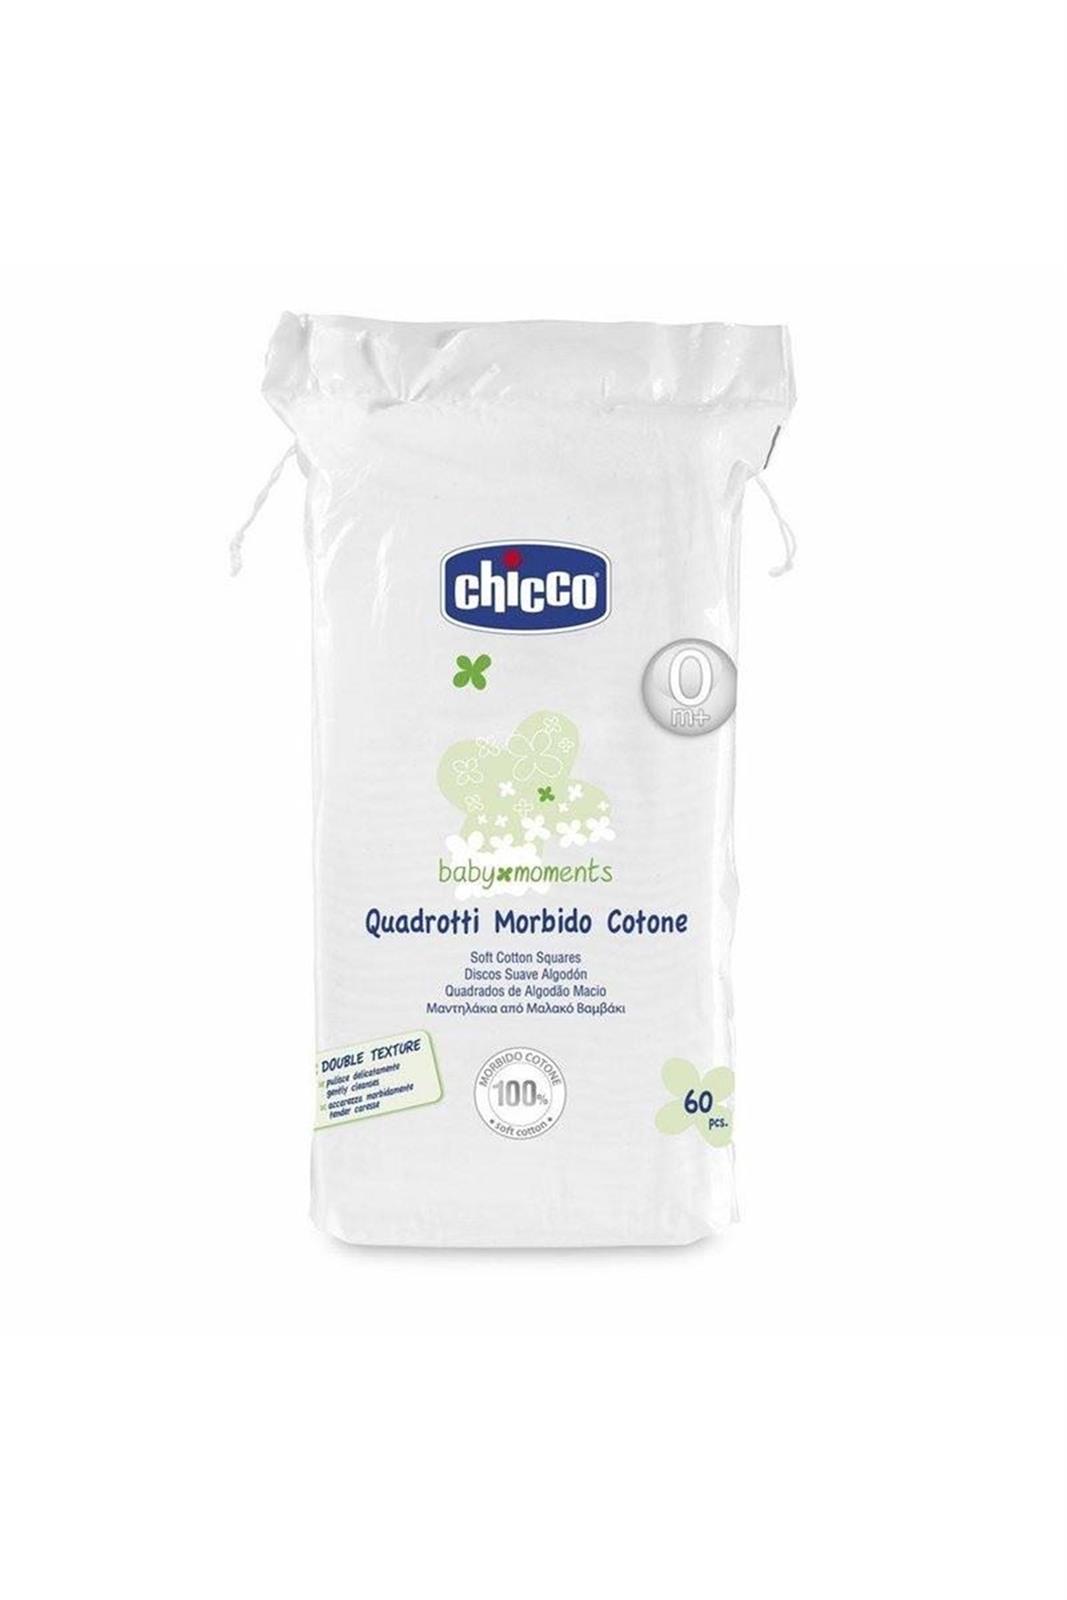 Chicco Baby Moments Pamuk 60 Adet